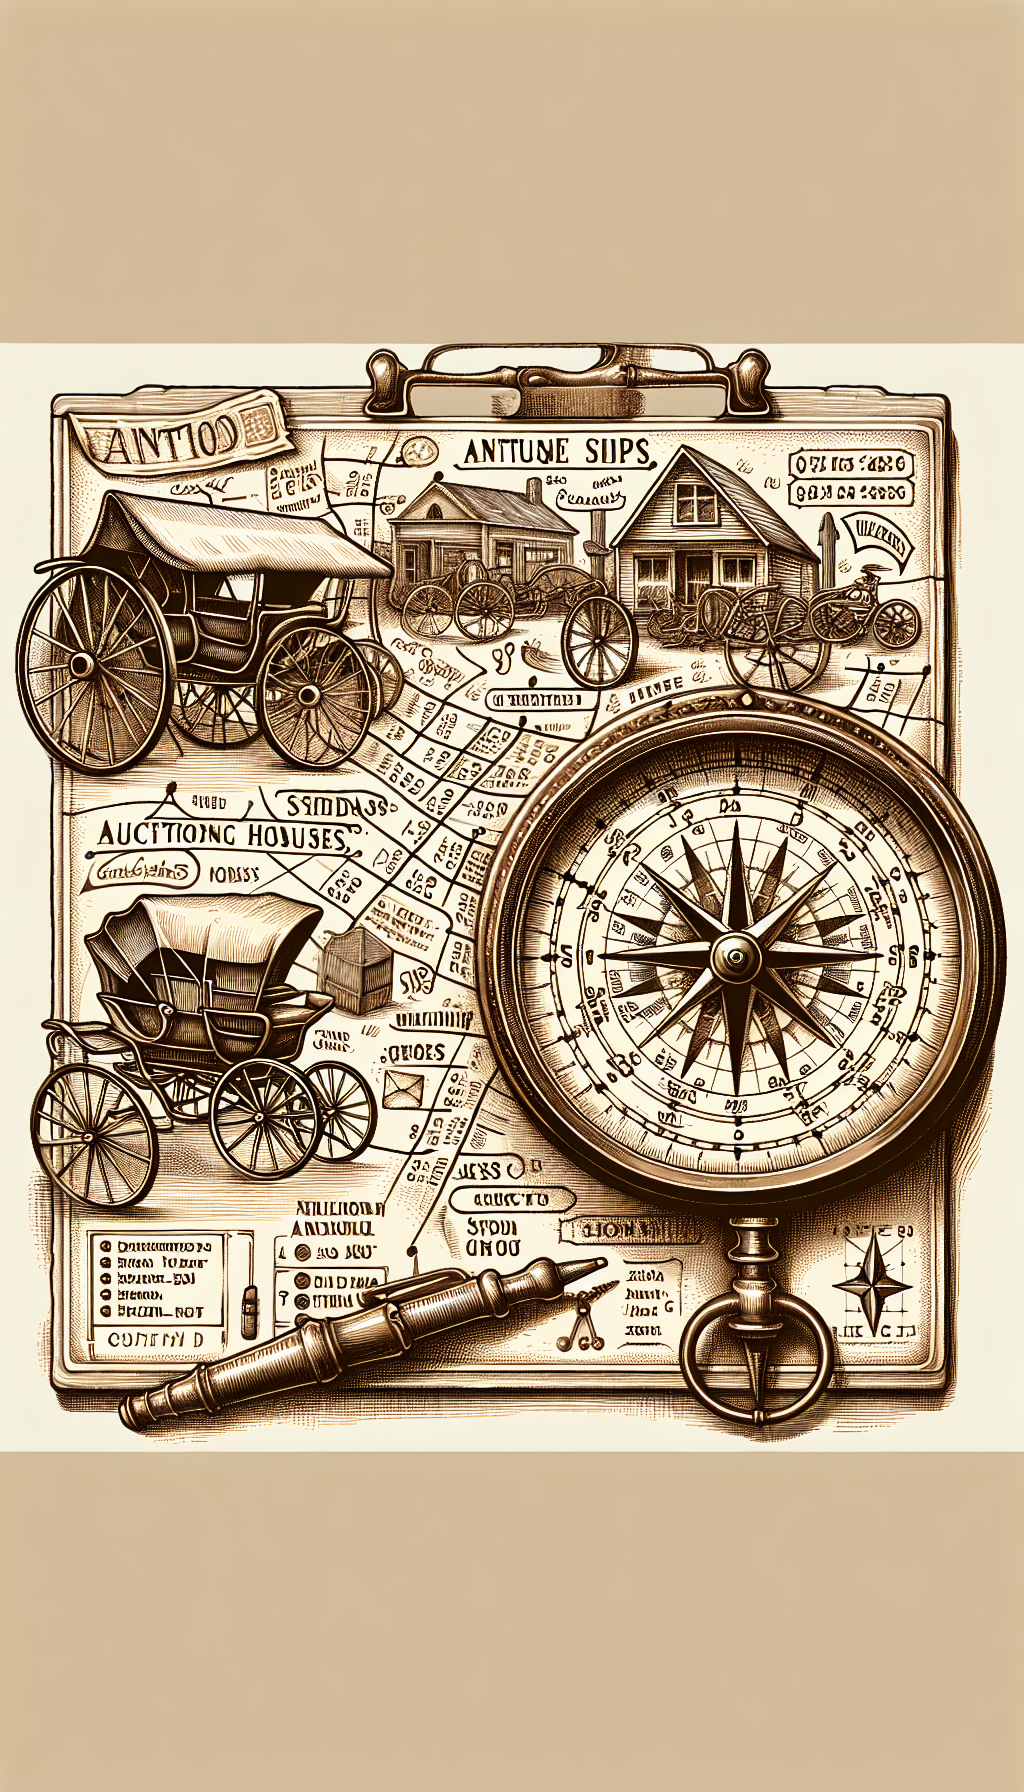 An illustration portraying a whimsical map dotted with vintage shops, auction houses, and garage sales, each marked by an intricate, classic tricycle that seems to beckon collectors. In the foreground, a large, ornate compass with symbols indicating price tags and condition grades guides the journey, highlighting the antique tricycles' value. The various elements blend in a sepia-toned, sketch-like style, evoking nostalgia and the hunt for hidden treasures.